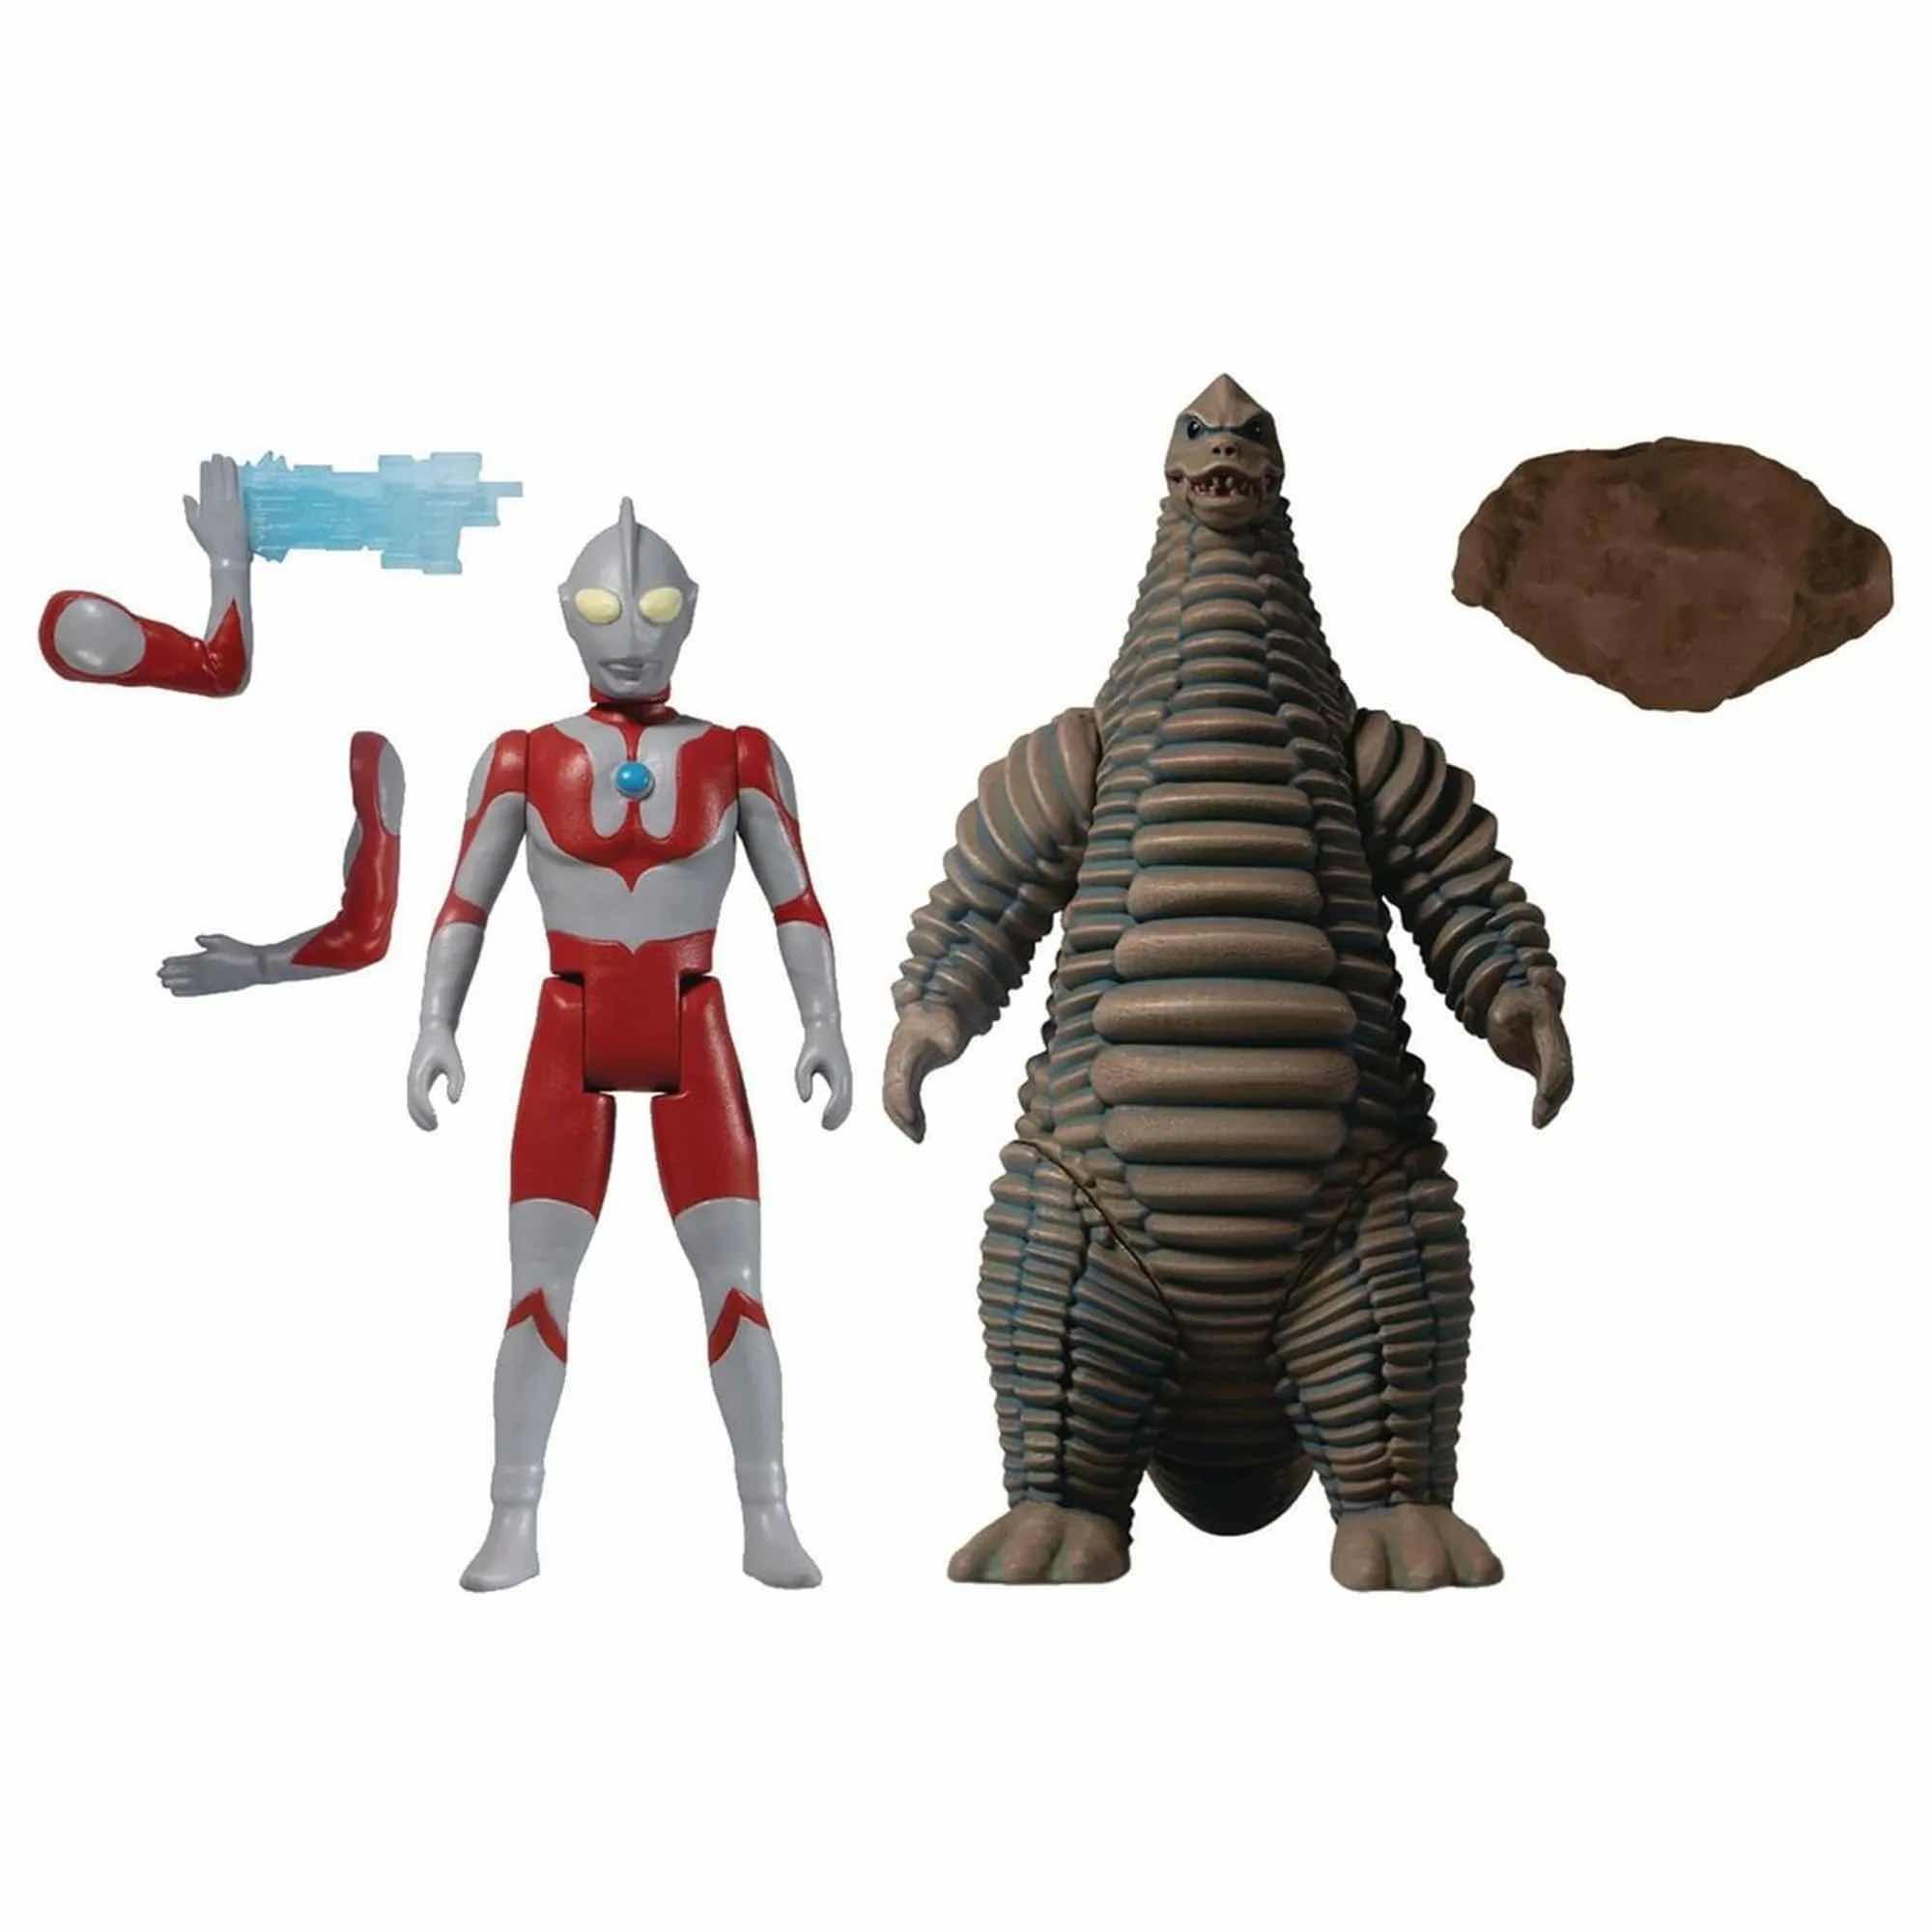 Photo 2 of NEW MEZCO TOYZ 5 POINTS ULTRAMAN & RED KING BOXED SET (1)